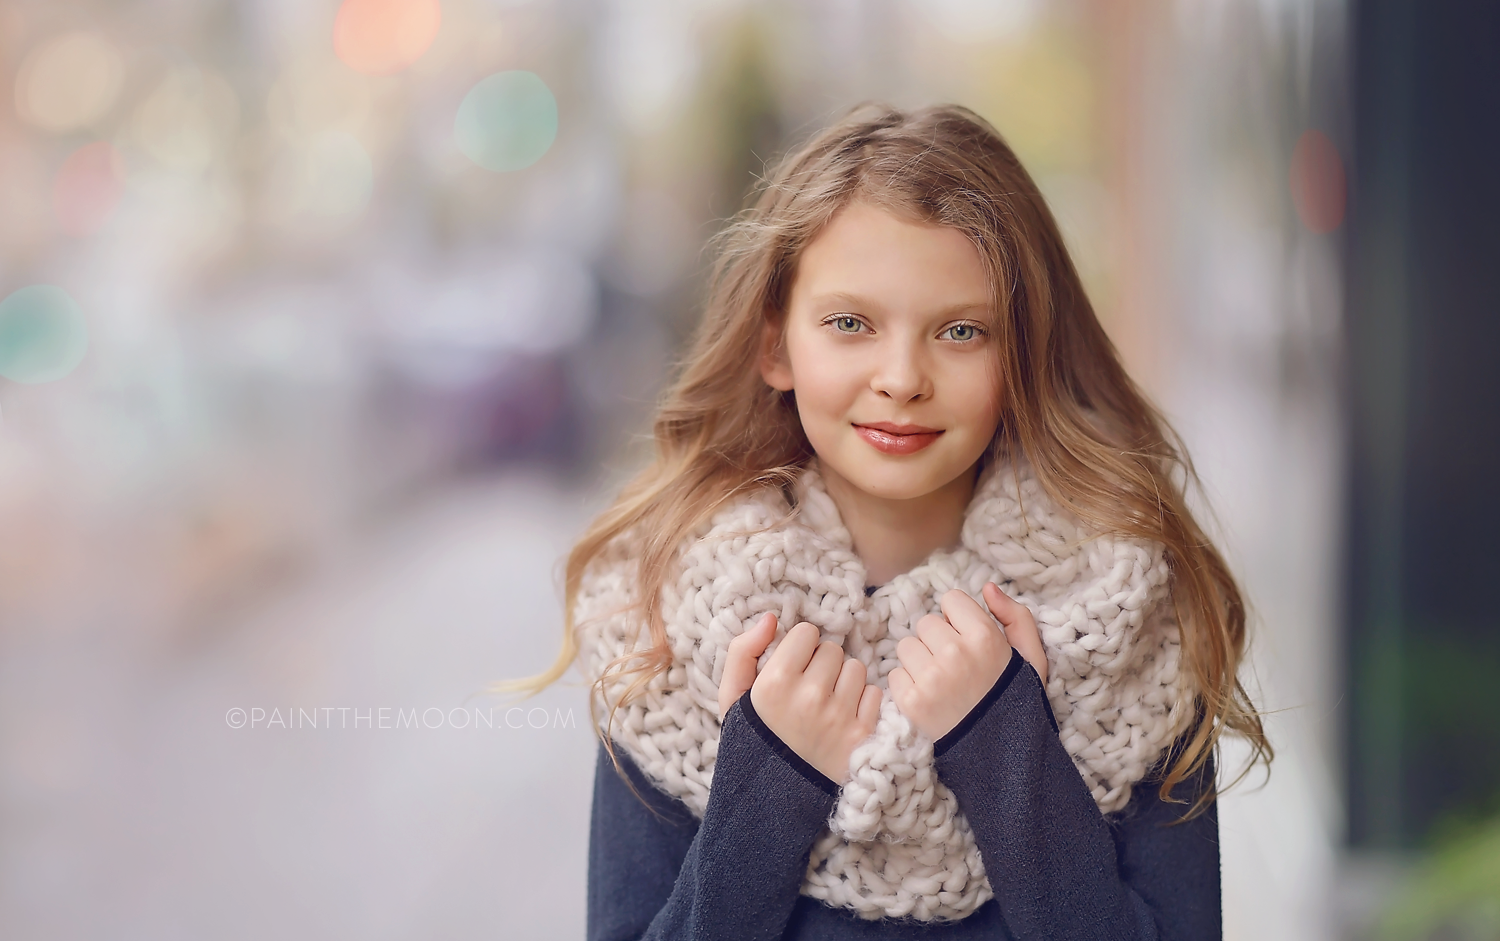 14 Tips to Get Better Bokeh | Photoshop Actions